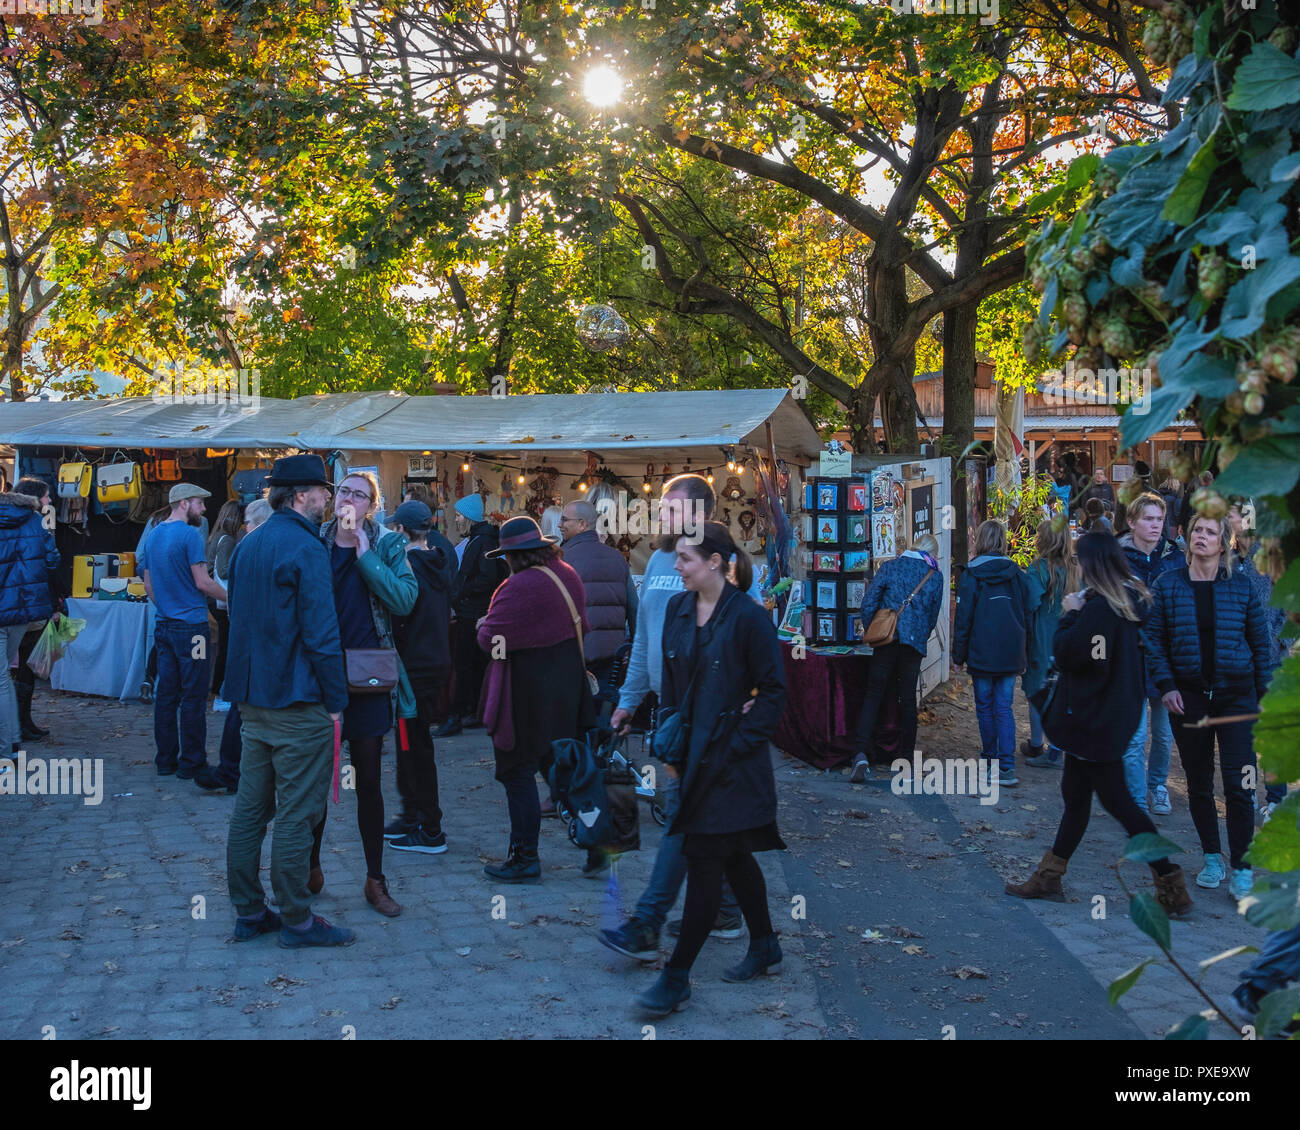 Berlin, Germany. 21st October 2018. The popular  Mauerpark park was crowded as Berliners & tourists enjoy  the last of the warm autumn weather. People enjoy the stalls at the flea market. credit: Eden Breitz/Alamy Live News Stock Photo